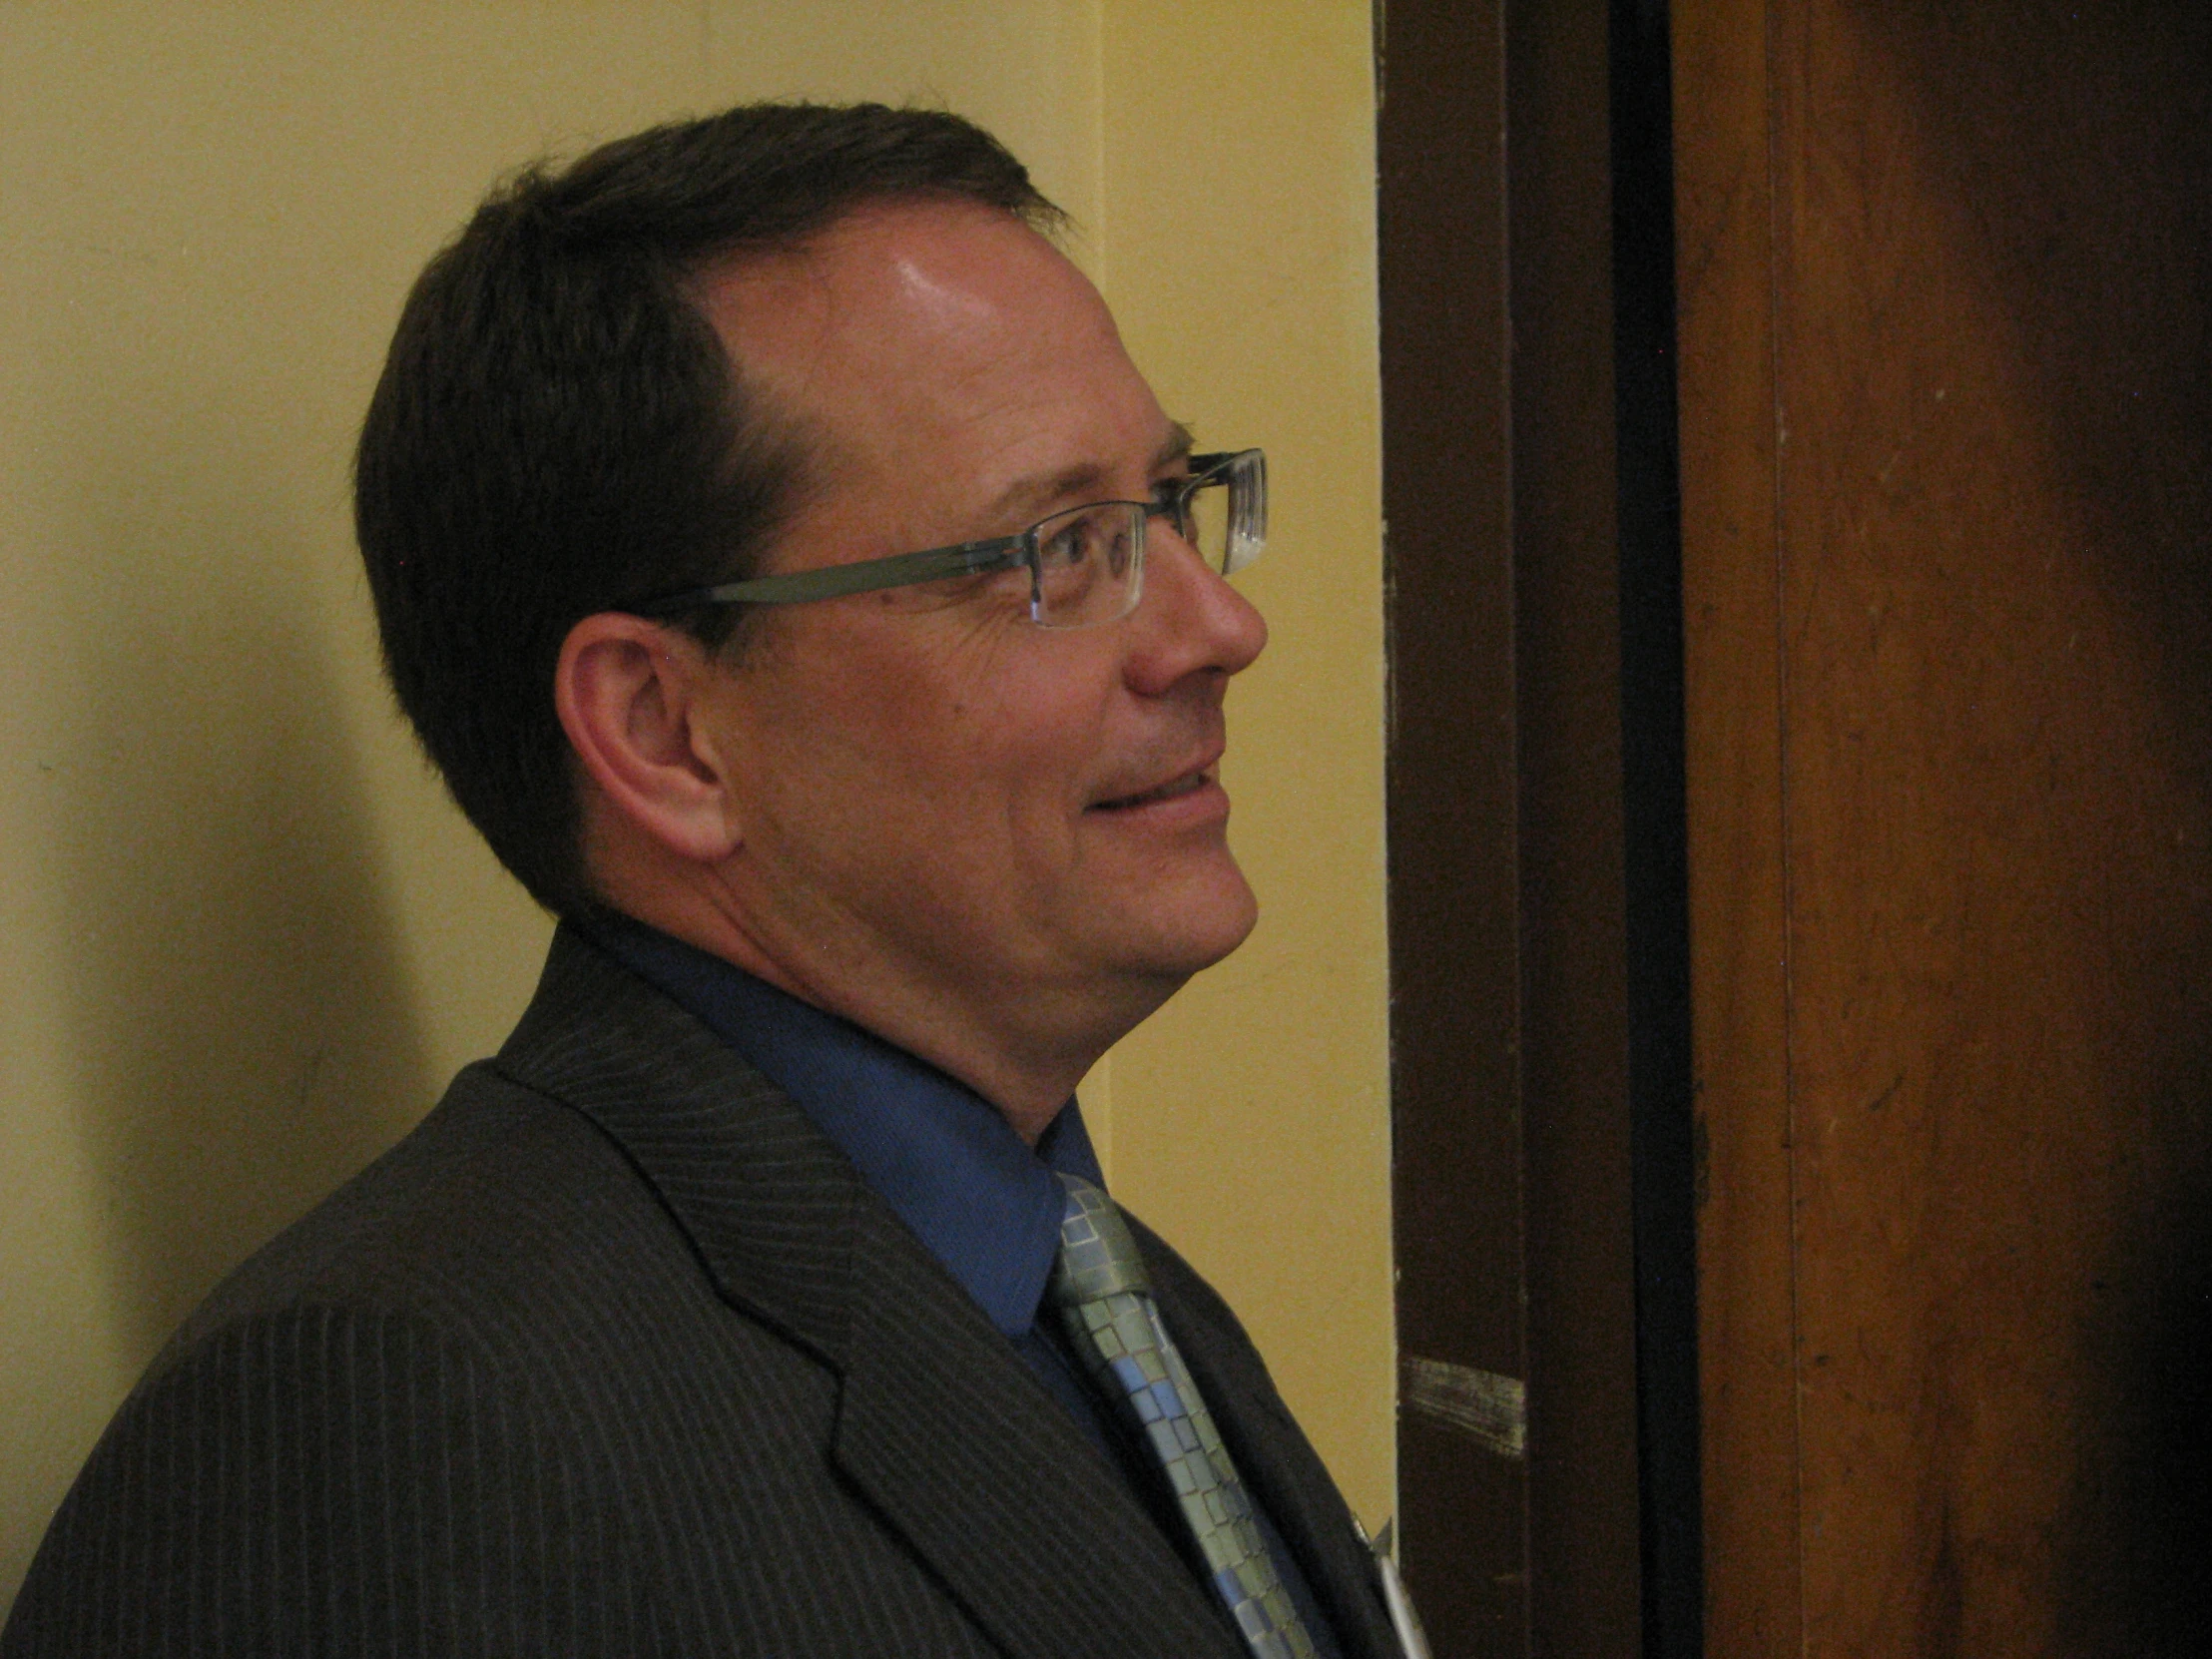 a man wearing a tie and glasses standing next to a door